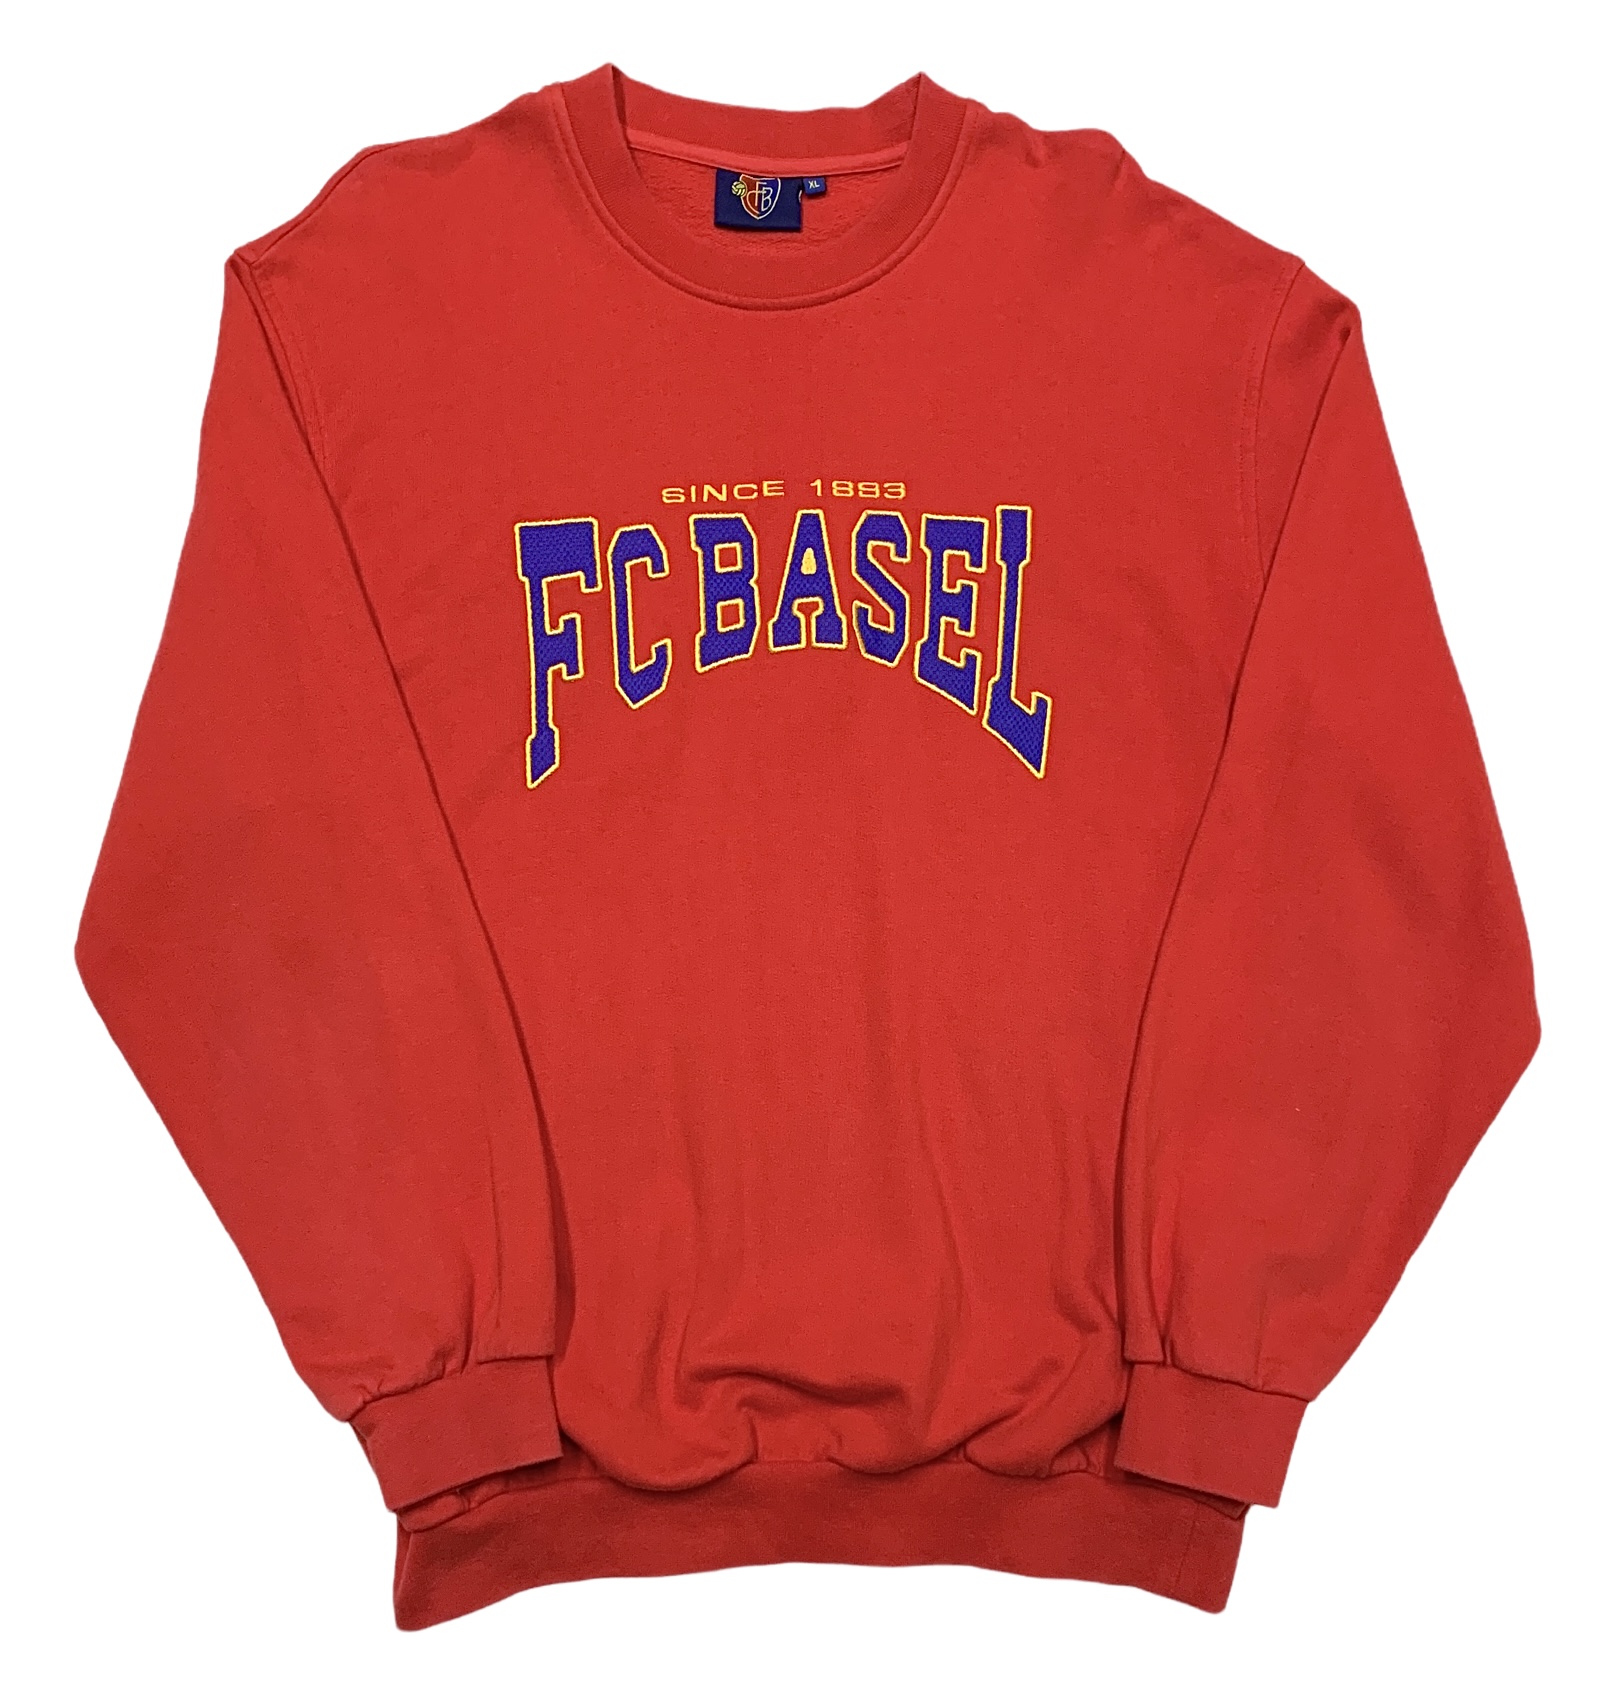 FC Basel embroidered sweater - Lowkey Archives